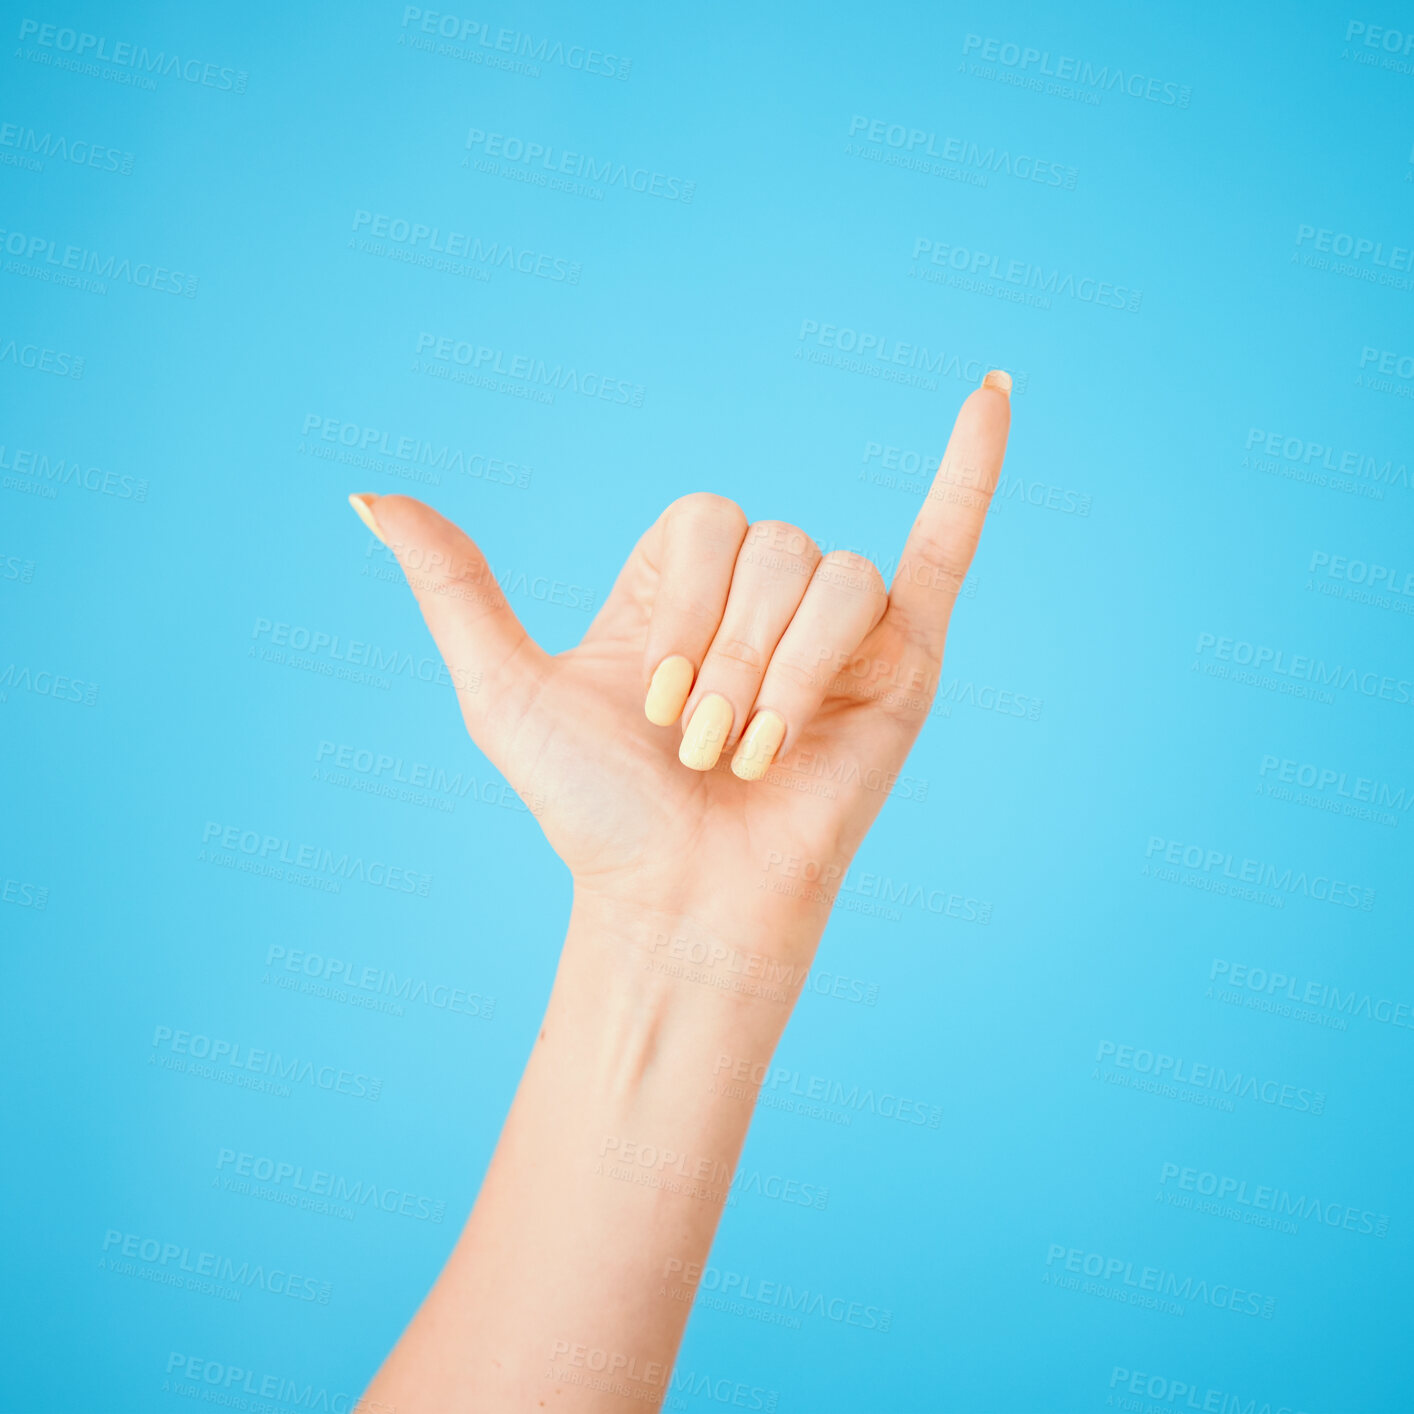 Buy stock photo Studio shot of an unrecognisable woman showing a shaka hand sign against a blue background